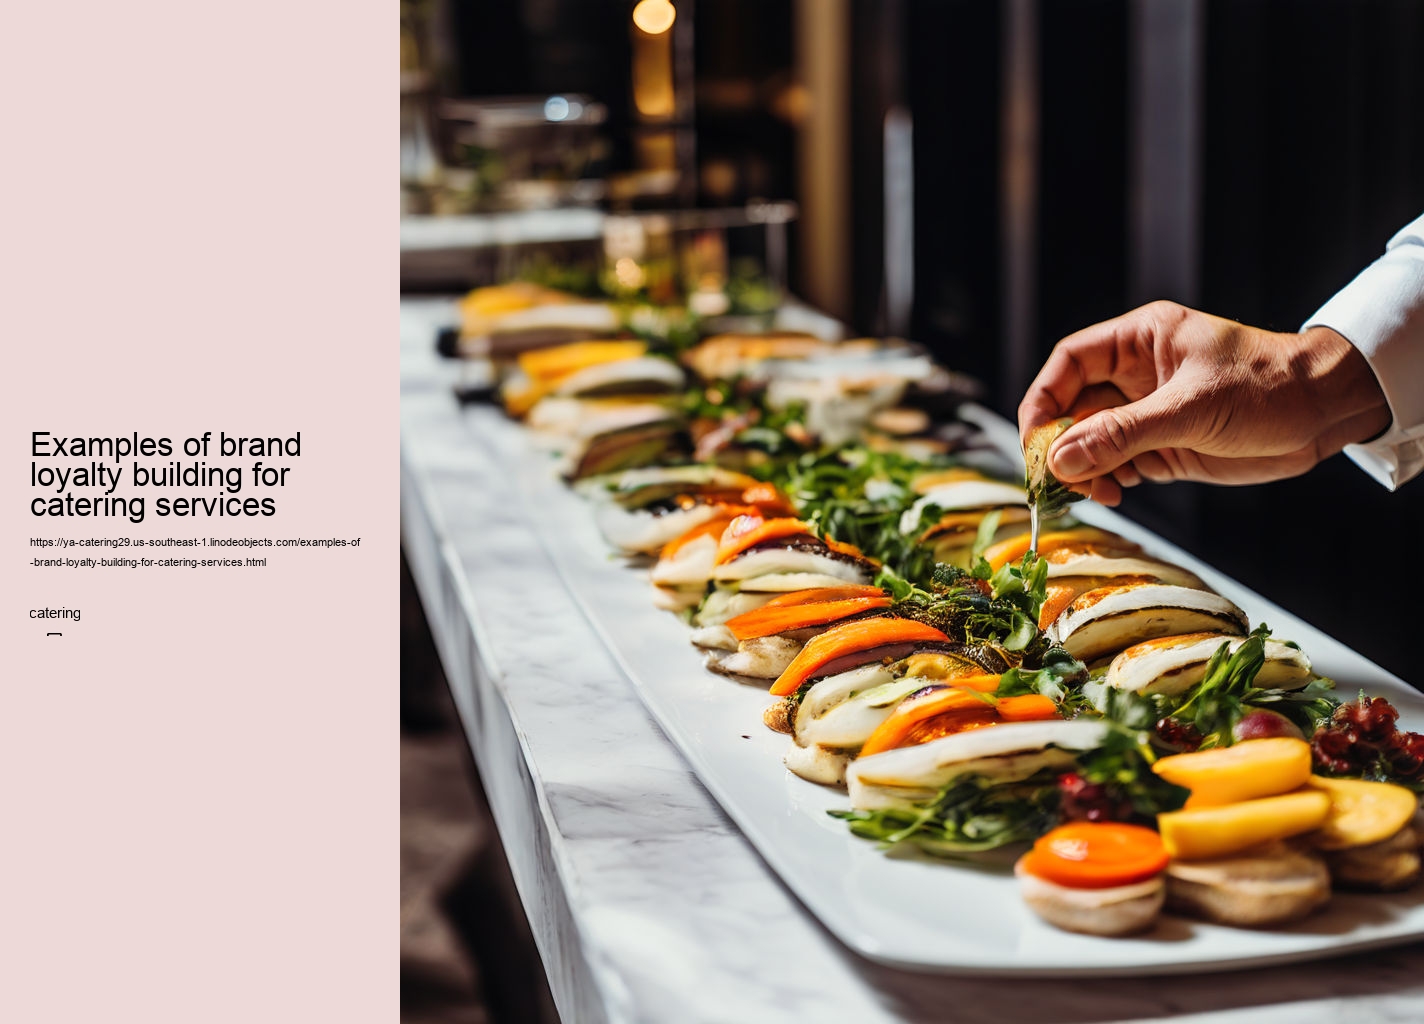 Examples of brand loyalty building for catering services